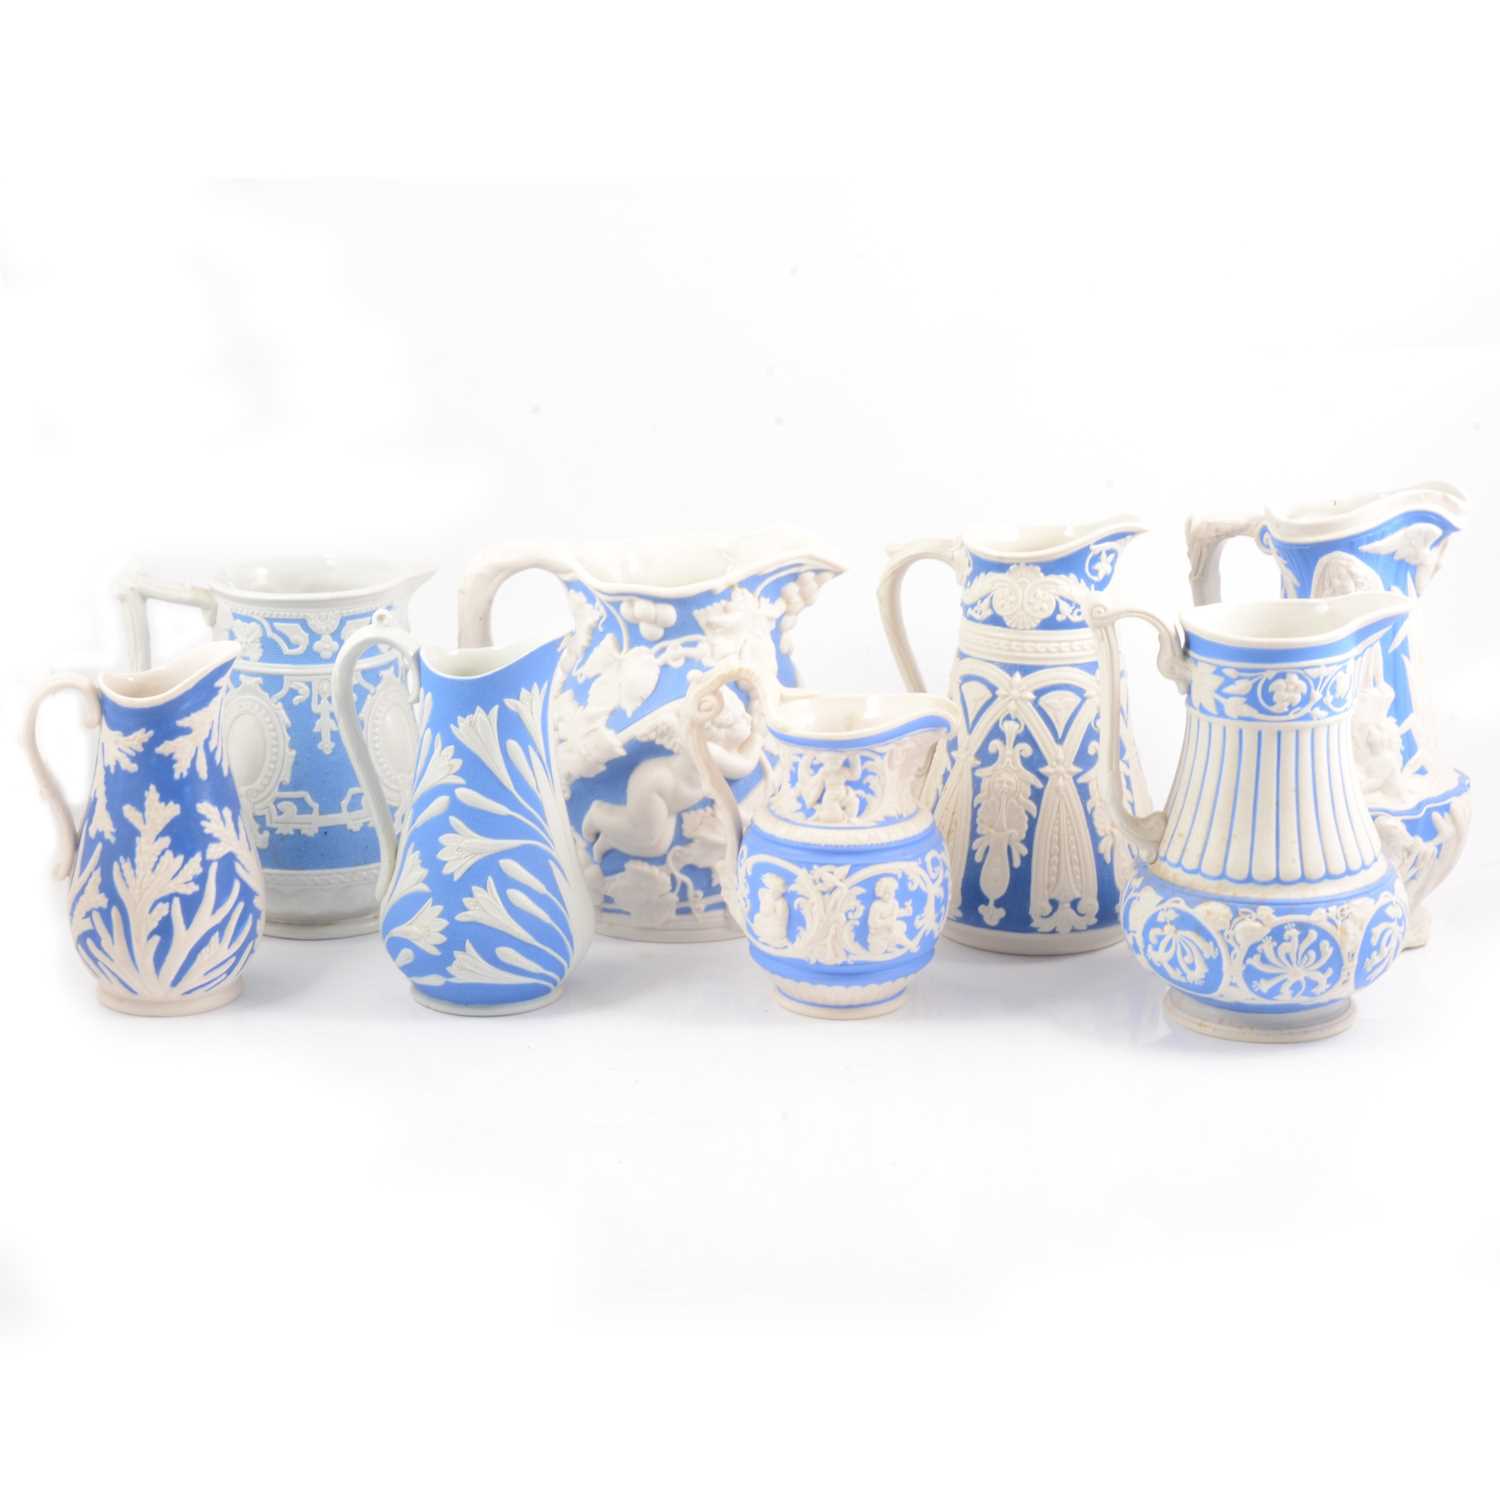 Lot 39 - Eight Victorian relief-moulded jugs, various makers.